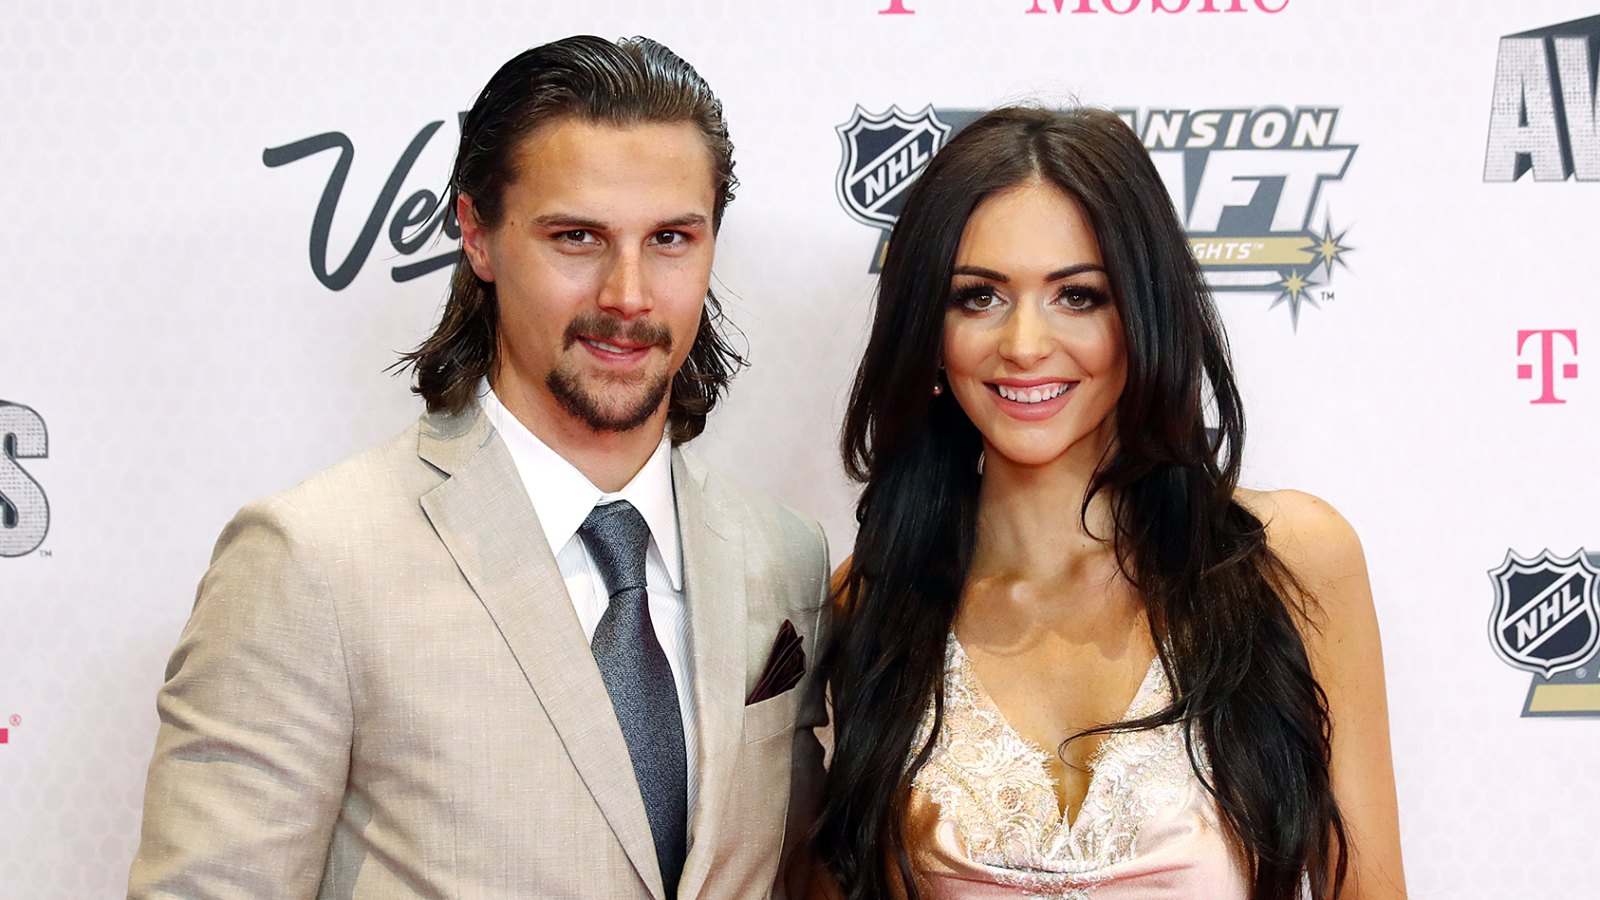 NHL Star Erik Karlsson and Wife Melinda Lose Son a Month Before Due Date